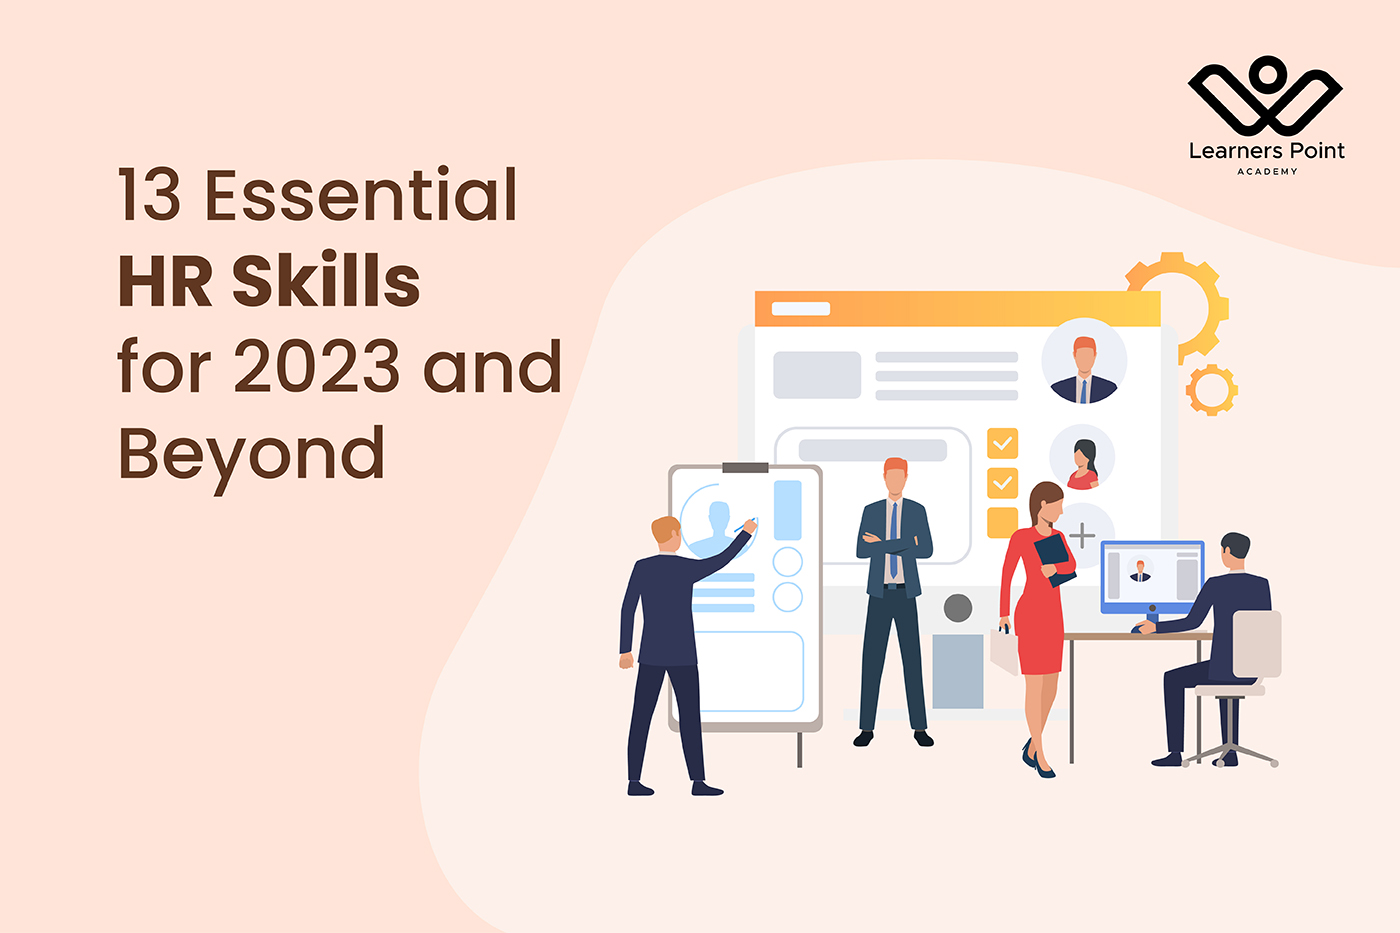 13 Essential HR Skills for 2023 and Beyond